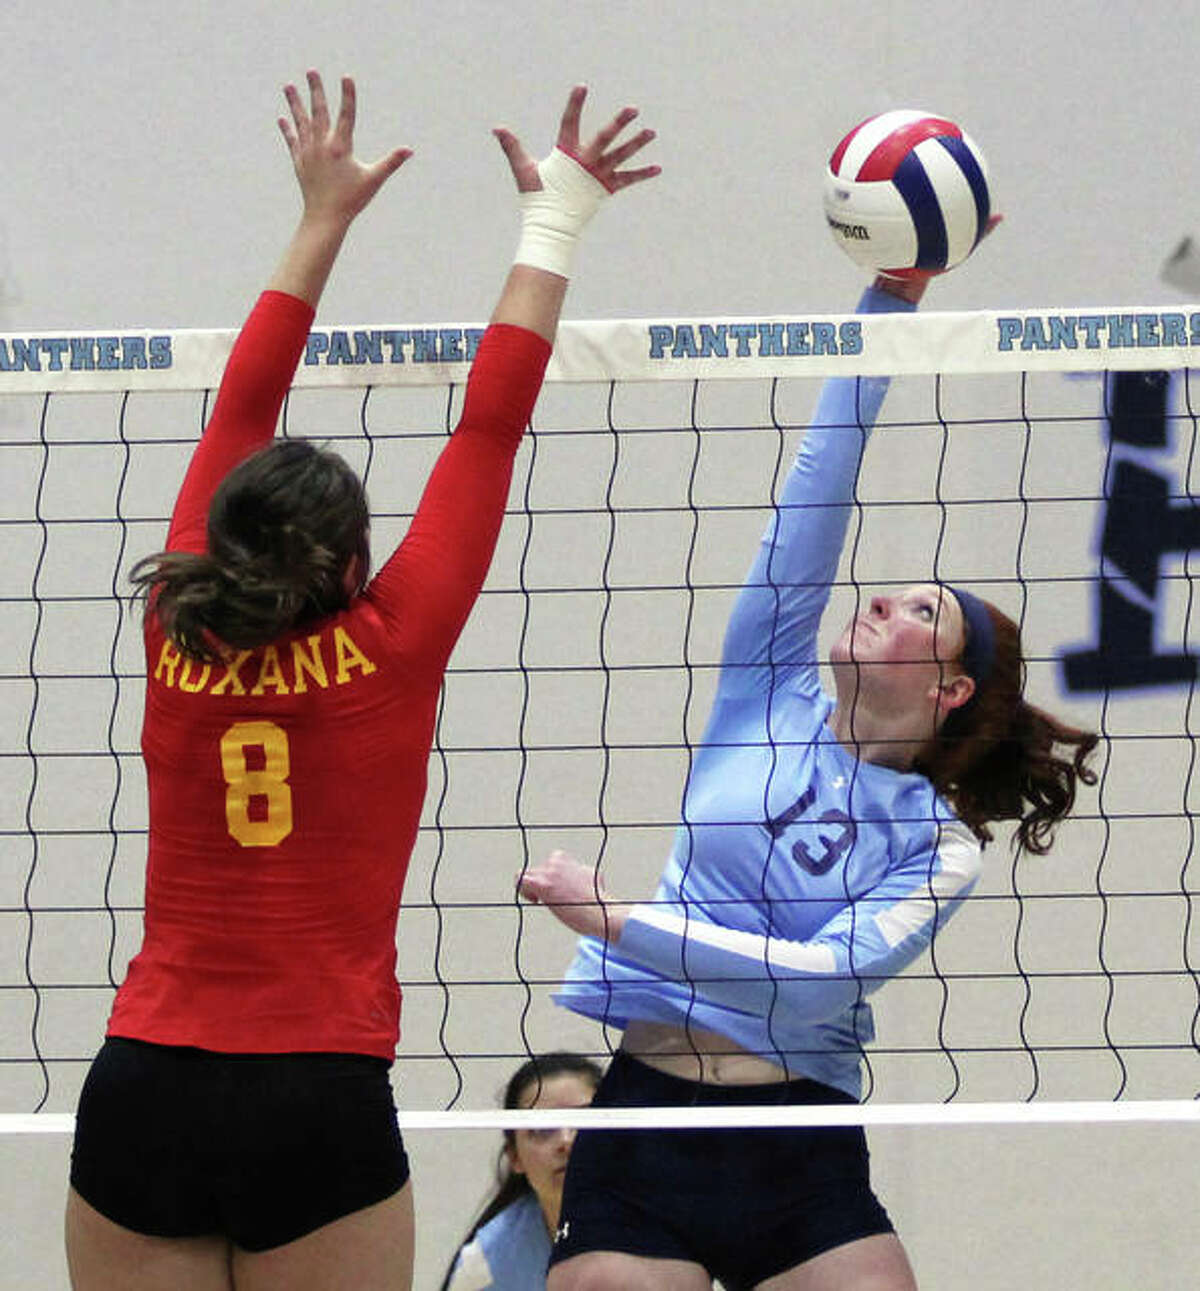 The Panthers were only seeking an opportunity and they earned that Tuesday night with a 25-19, 25-23 victory over the Roxana Shells in the semifinals of the Jersey Class 3A Regional at Havens Gym.